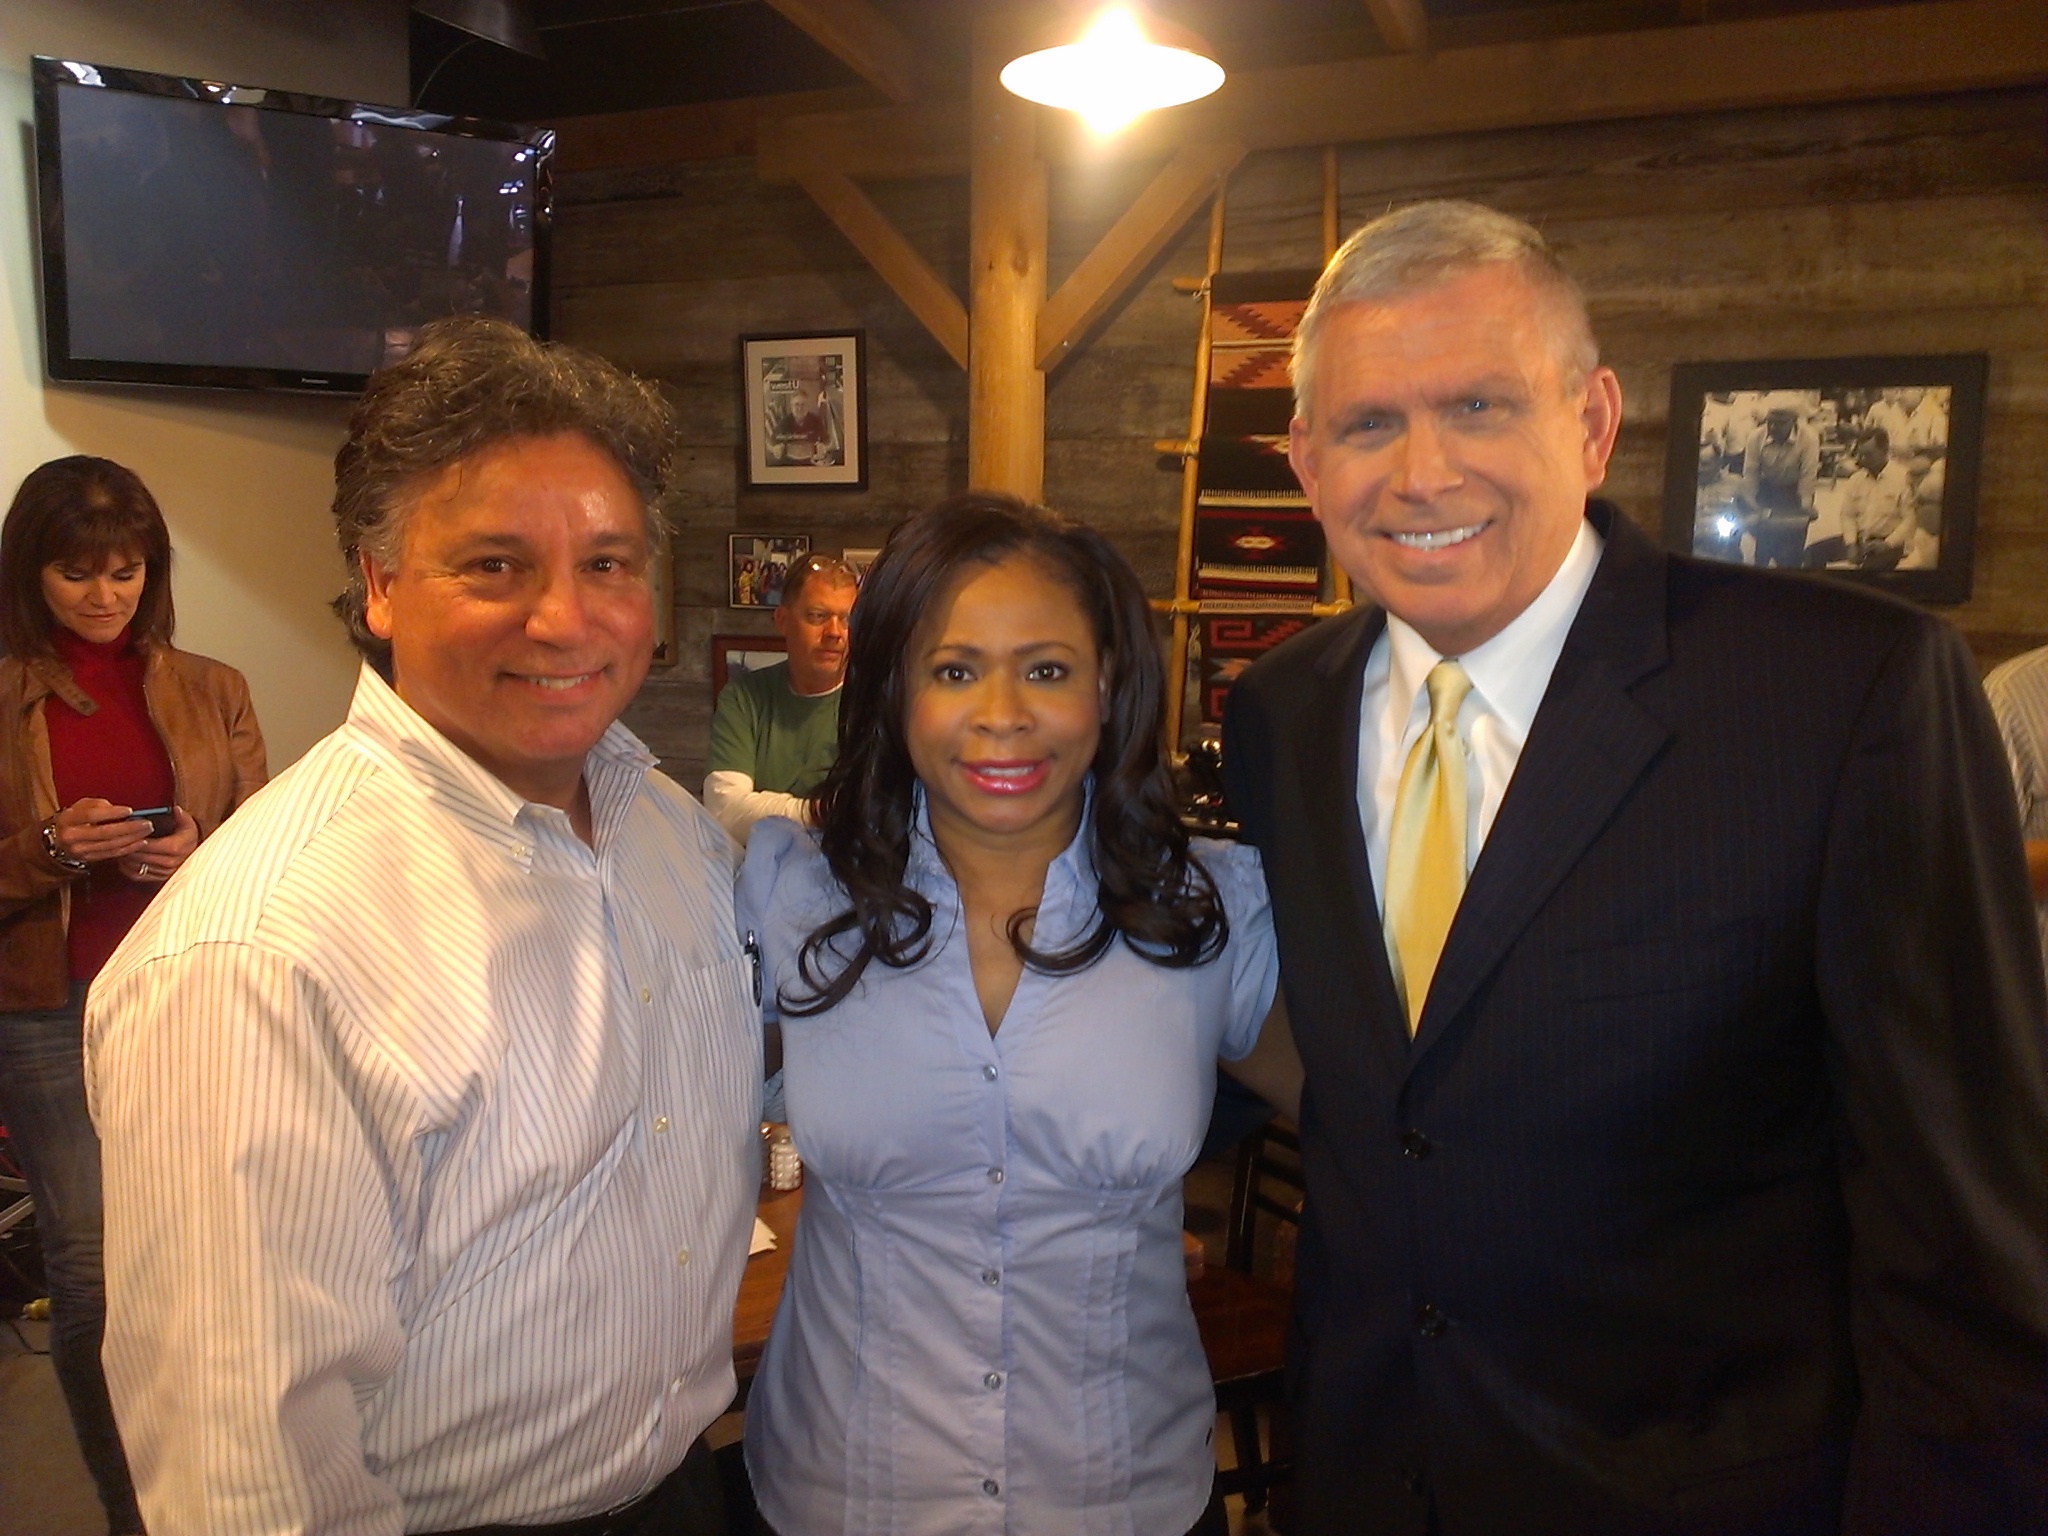 ABC Eyewitness News KTRK Commercial- Producer/Director Tom Ash and Anchor Don Nelson